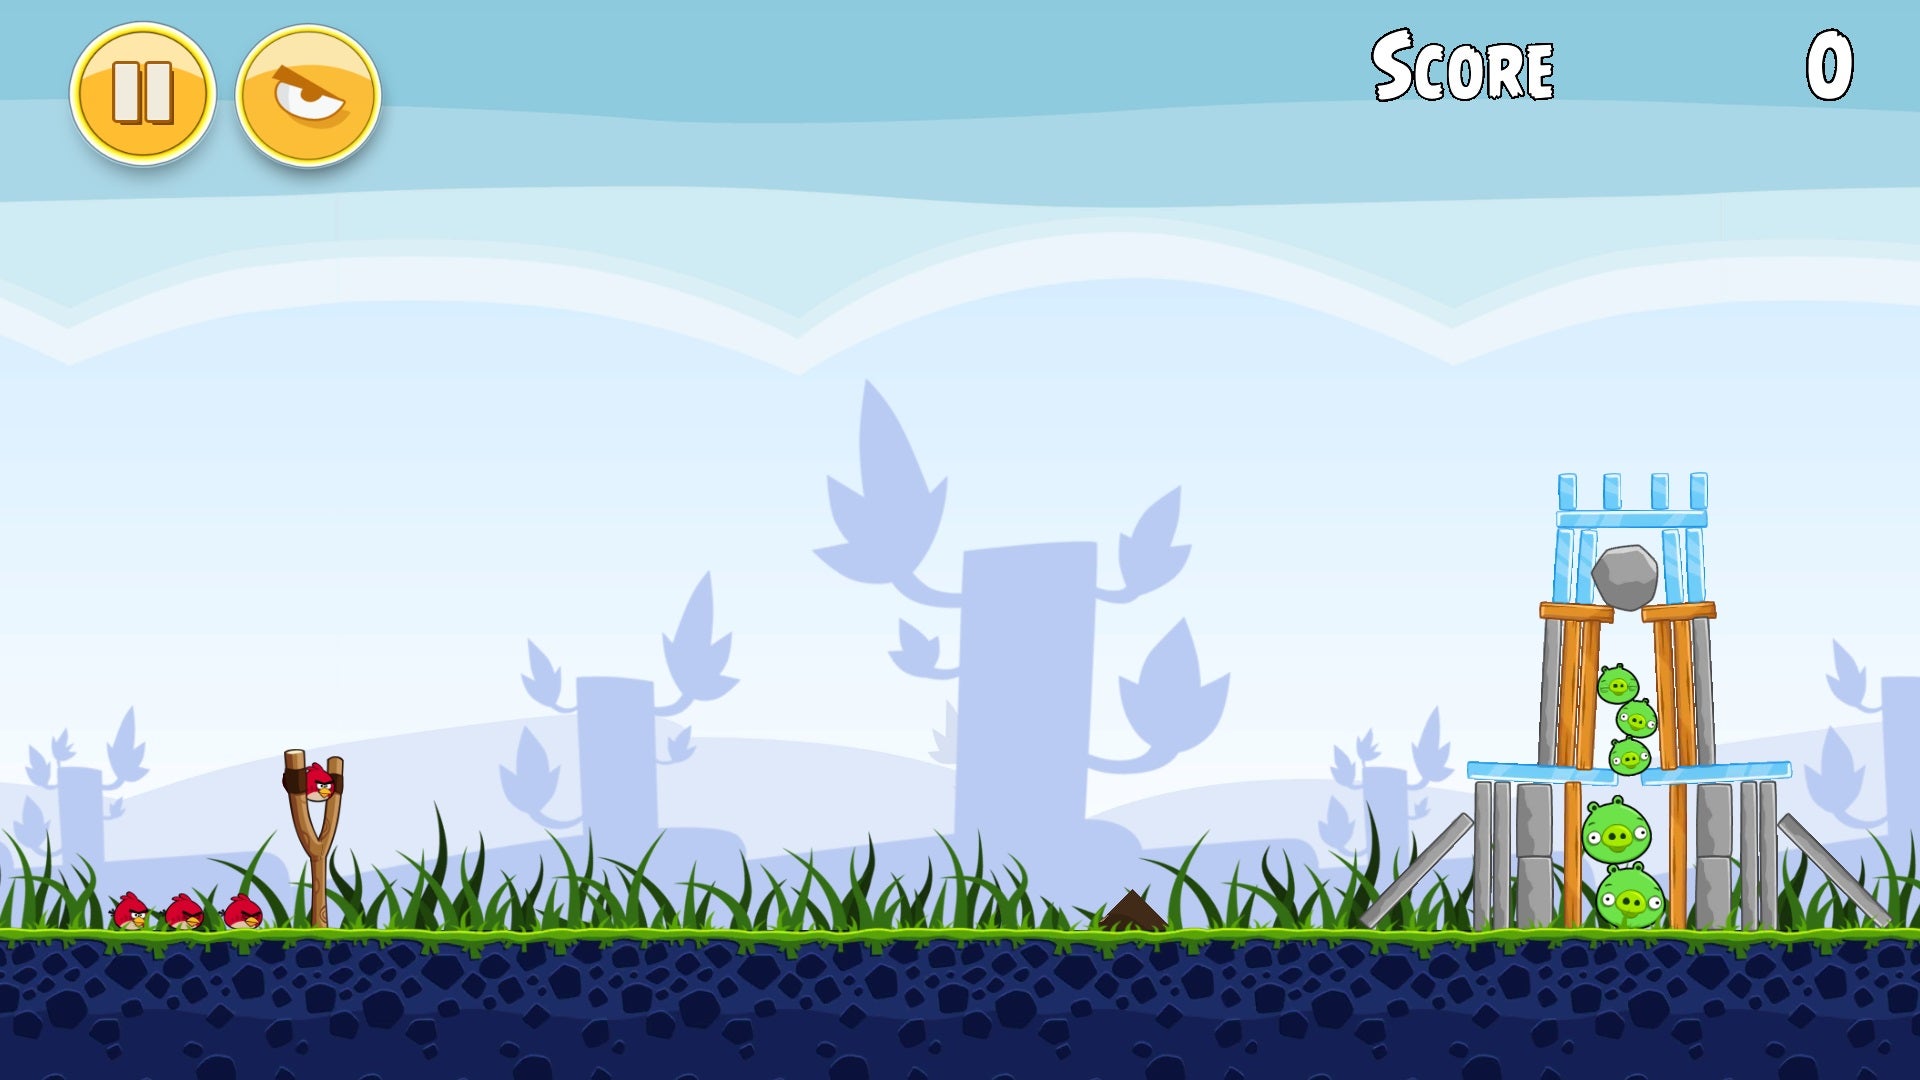 An Angry Birds level shows a handful of red birds near a slingshot apparatus aimed at five green pigs in a precariously constructed fort of ice, stone, and wood blocks